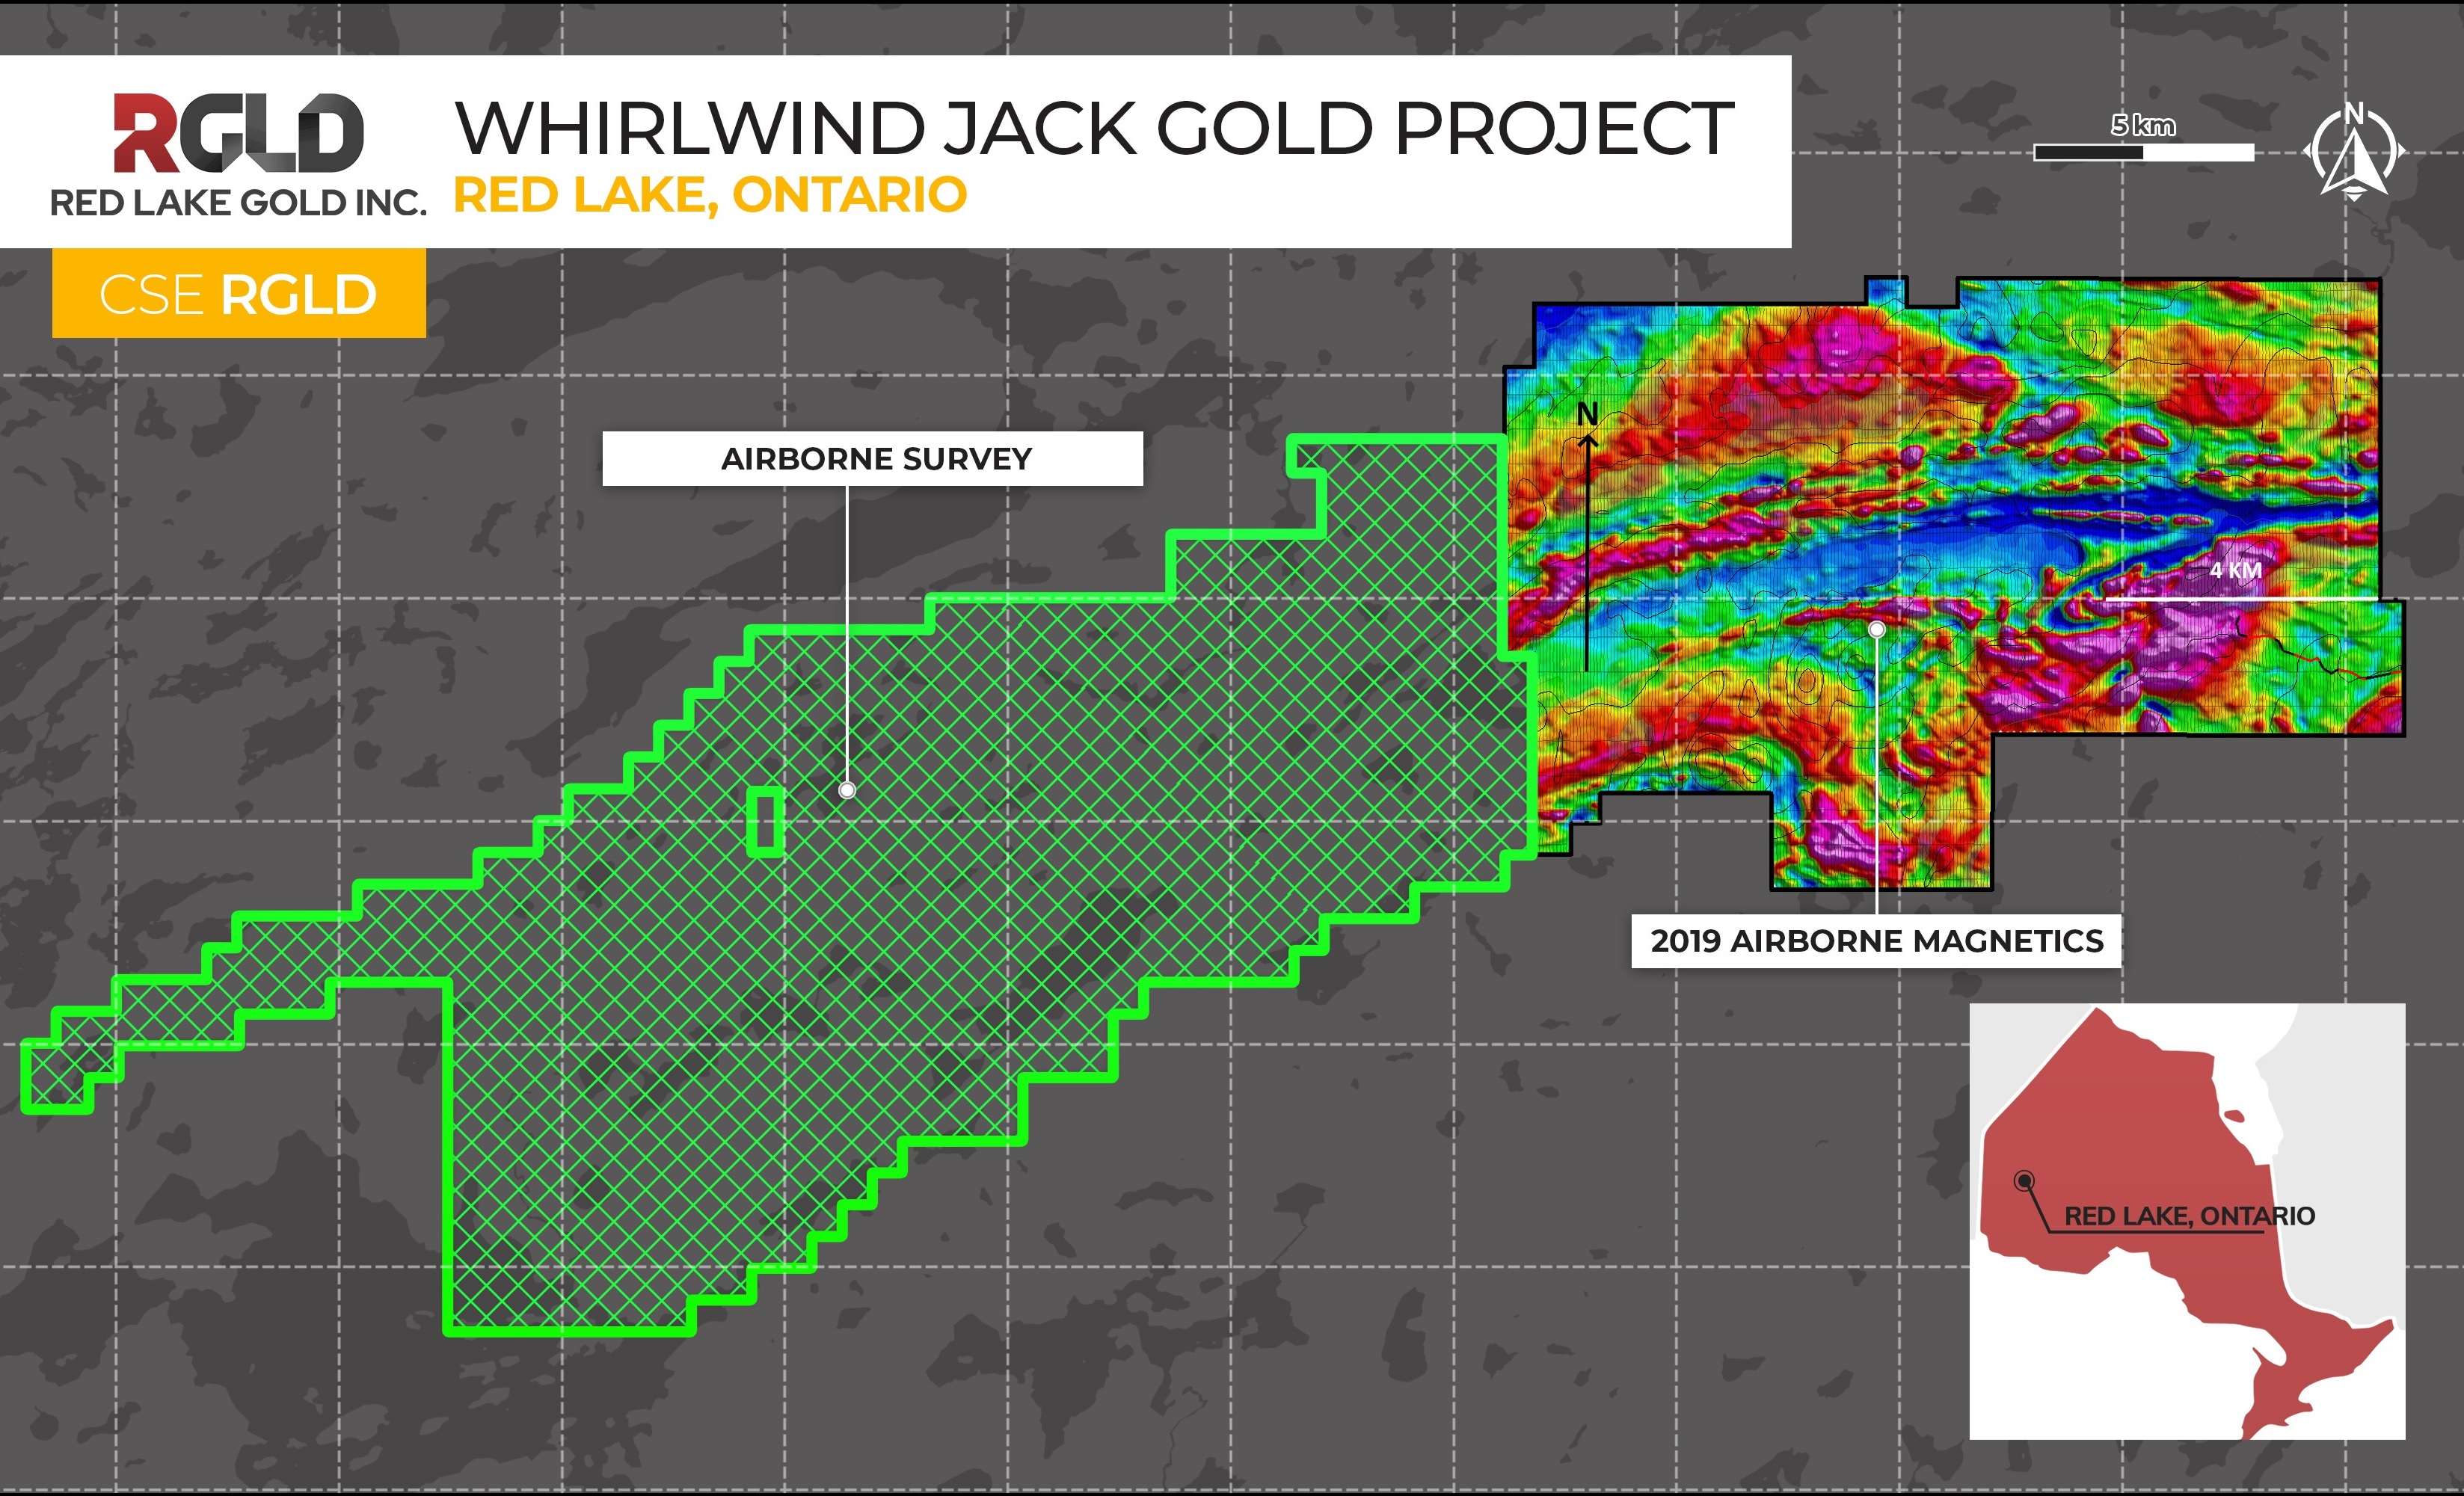 Figure 1: Map of the Fall 2020 Geophysical Survey at the Whirlwind Jack Gold Project (coverage area).